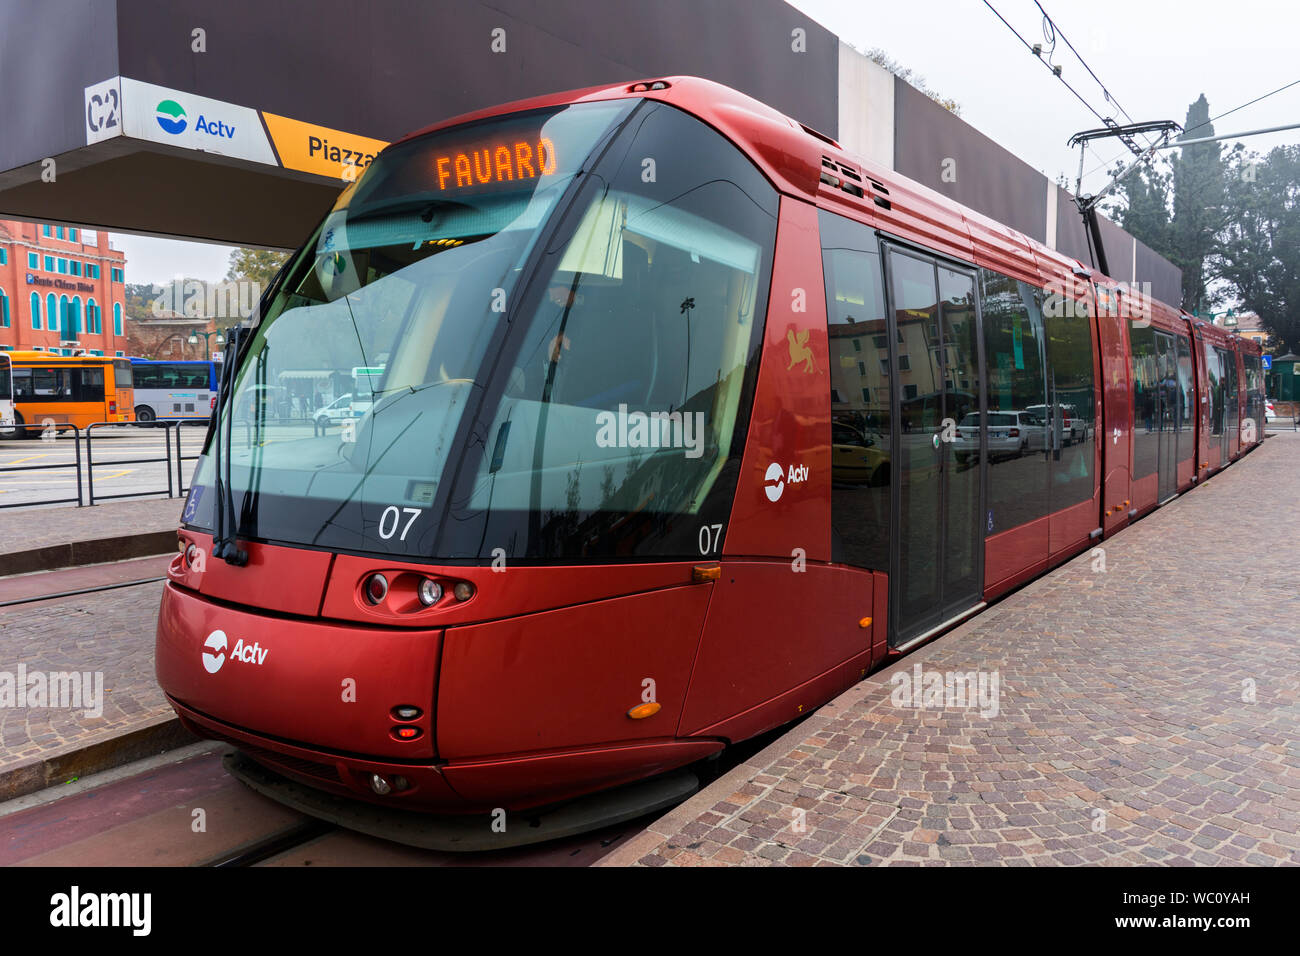 A Translohr rubber-tyred tram at Piazzale Roma (the main bus station), Venice, Italy Stock Photo